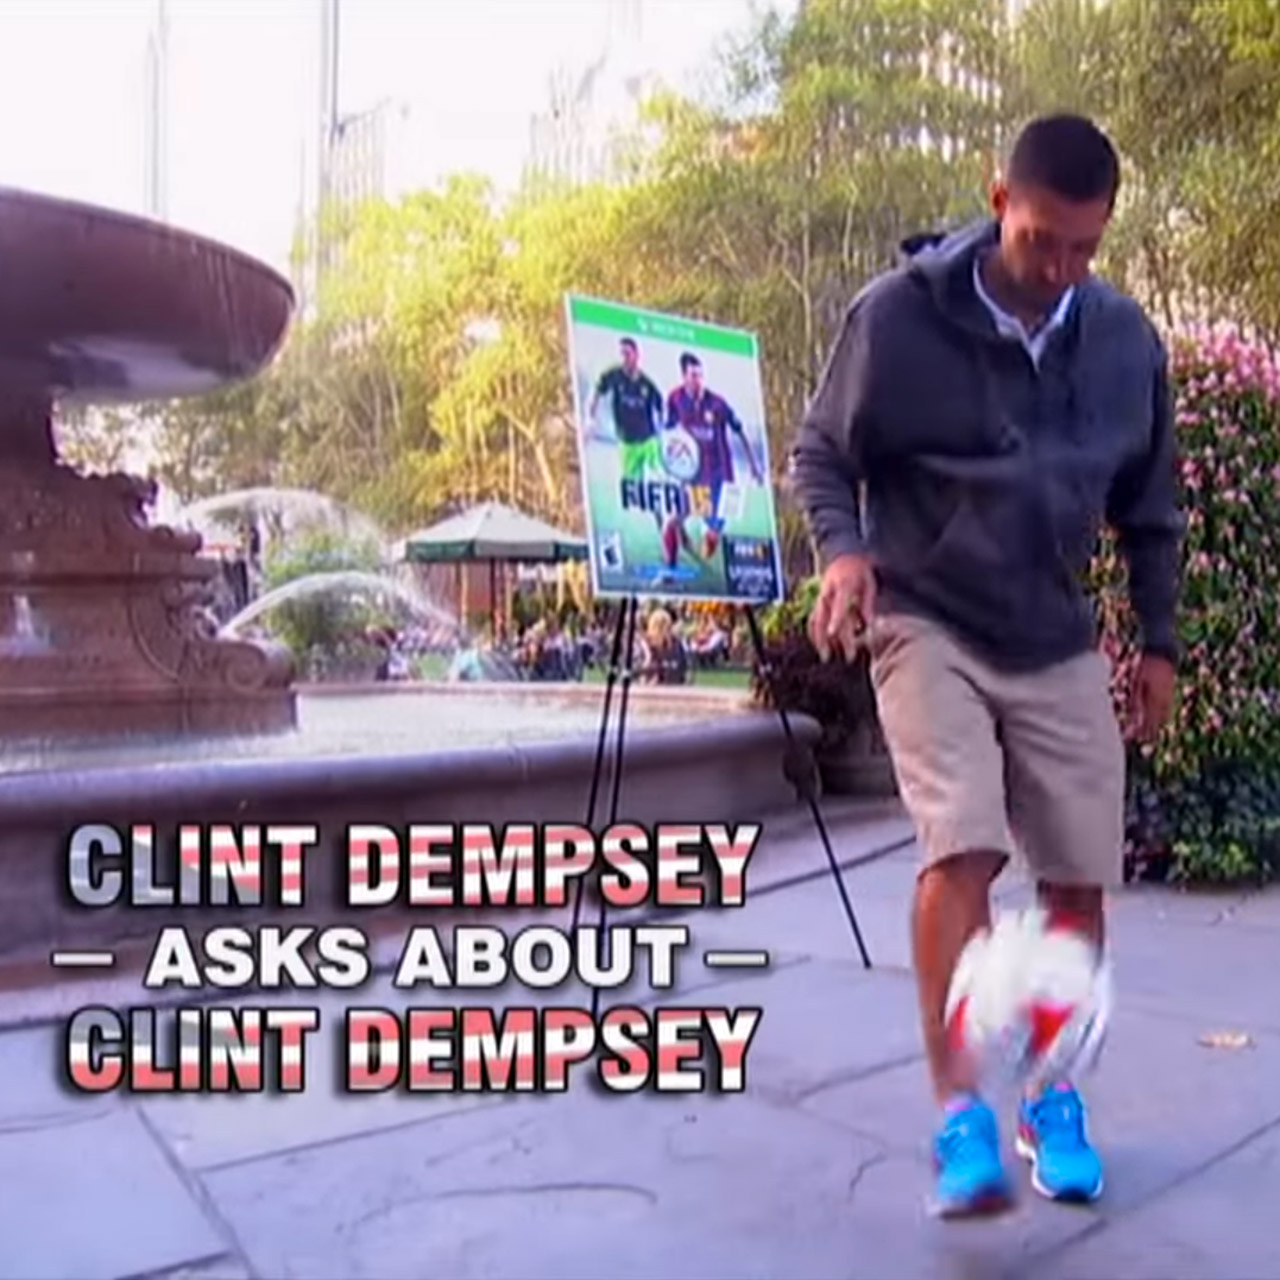 Clint Dempsey asks New Yorkers about Clint Dempsey